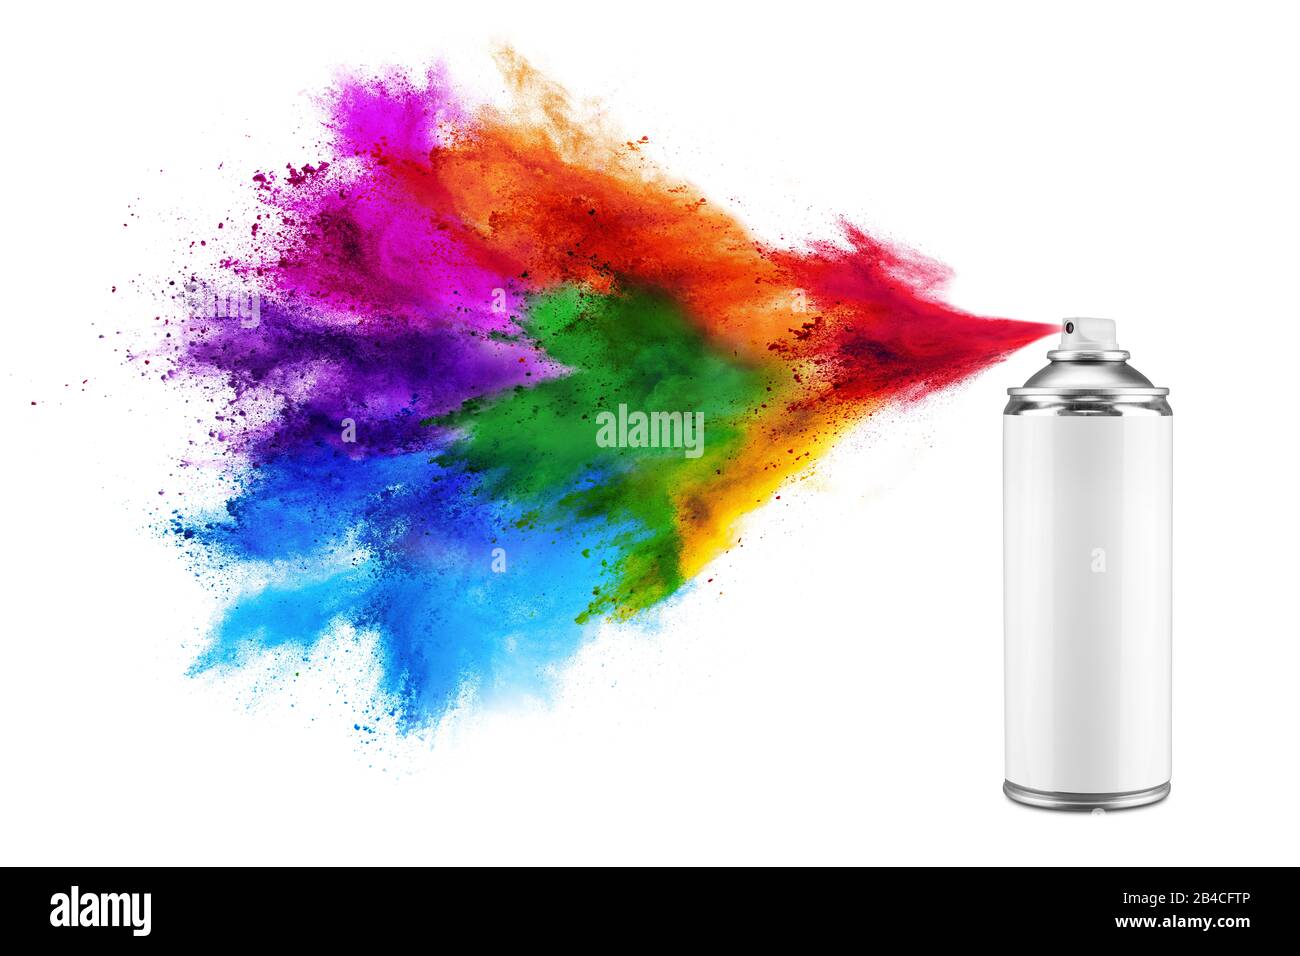 spray can spraying colorful rainbow holi paint color powder explosion isolated on white background. Industry diy paintjob graffiti concept. Stock Photo